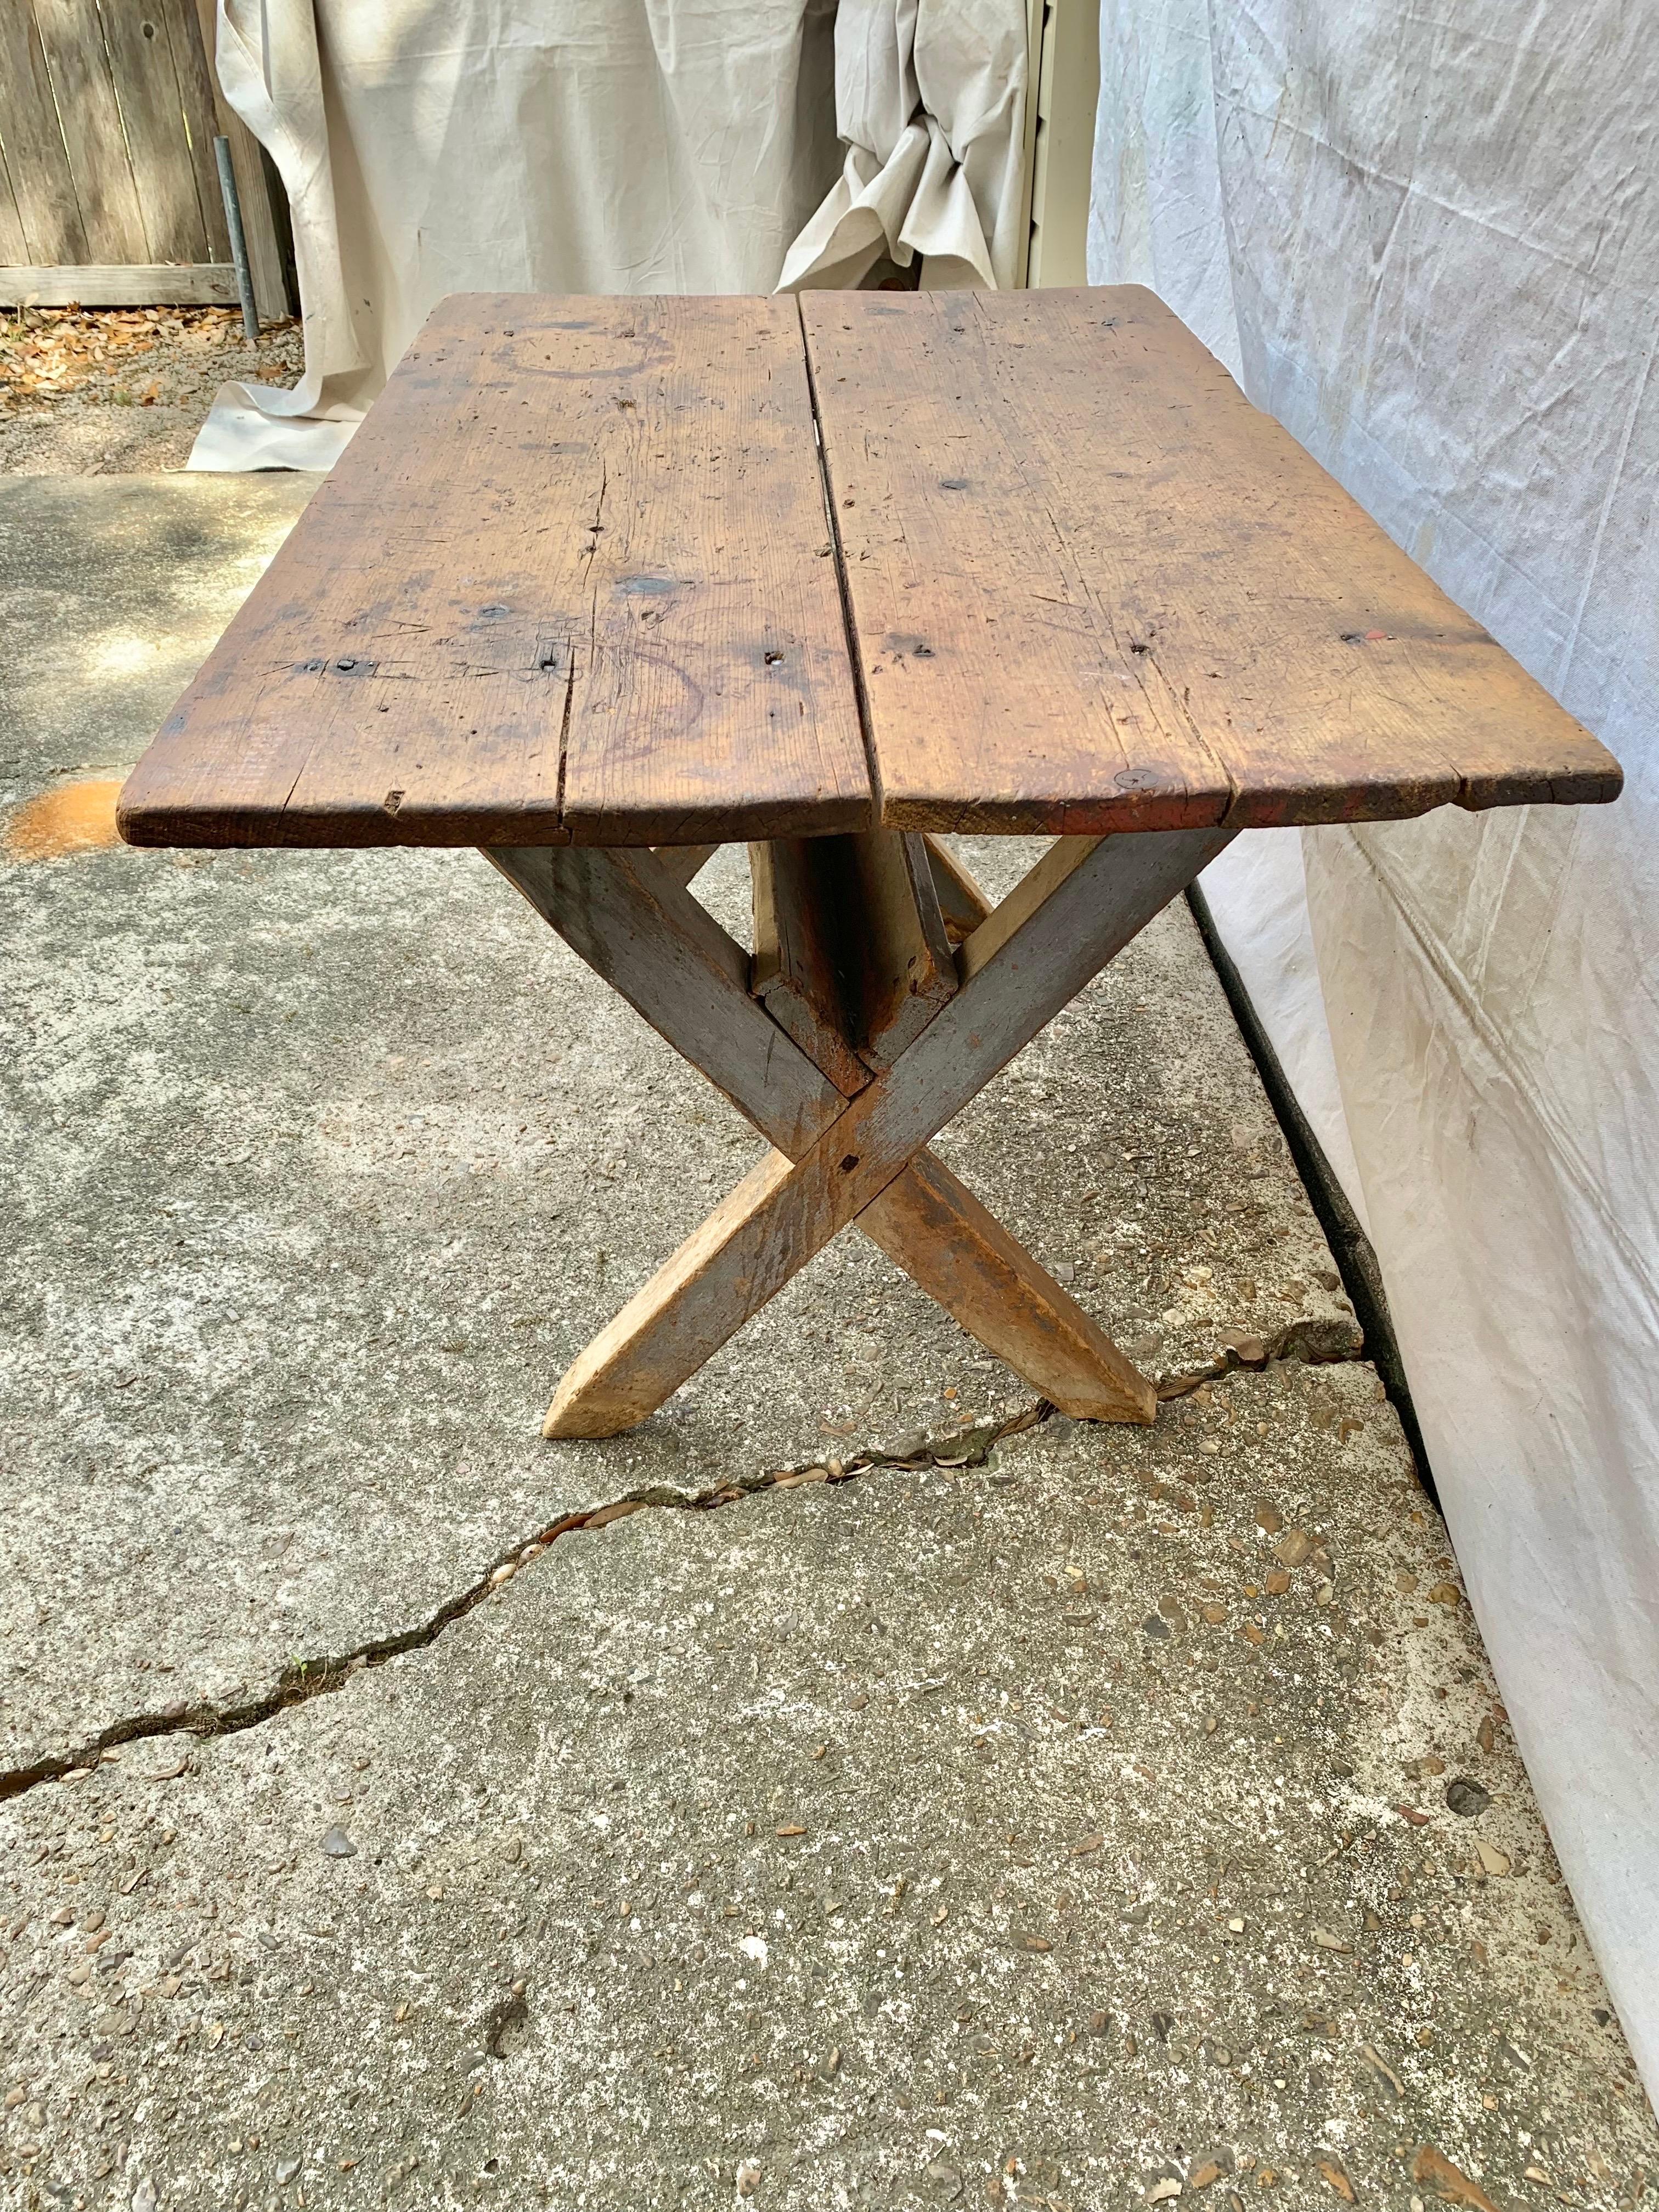 Early 20th Century English Pine Sawbuck Side Table In Good Condition For Sale In Burton, TX